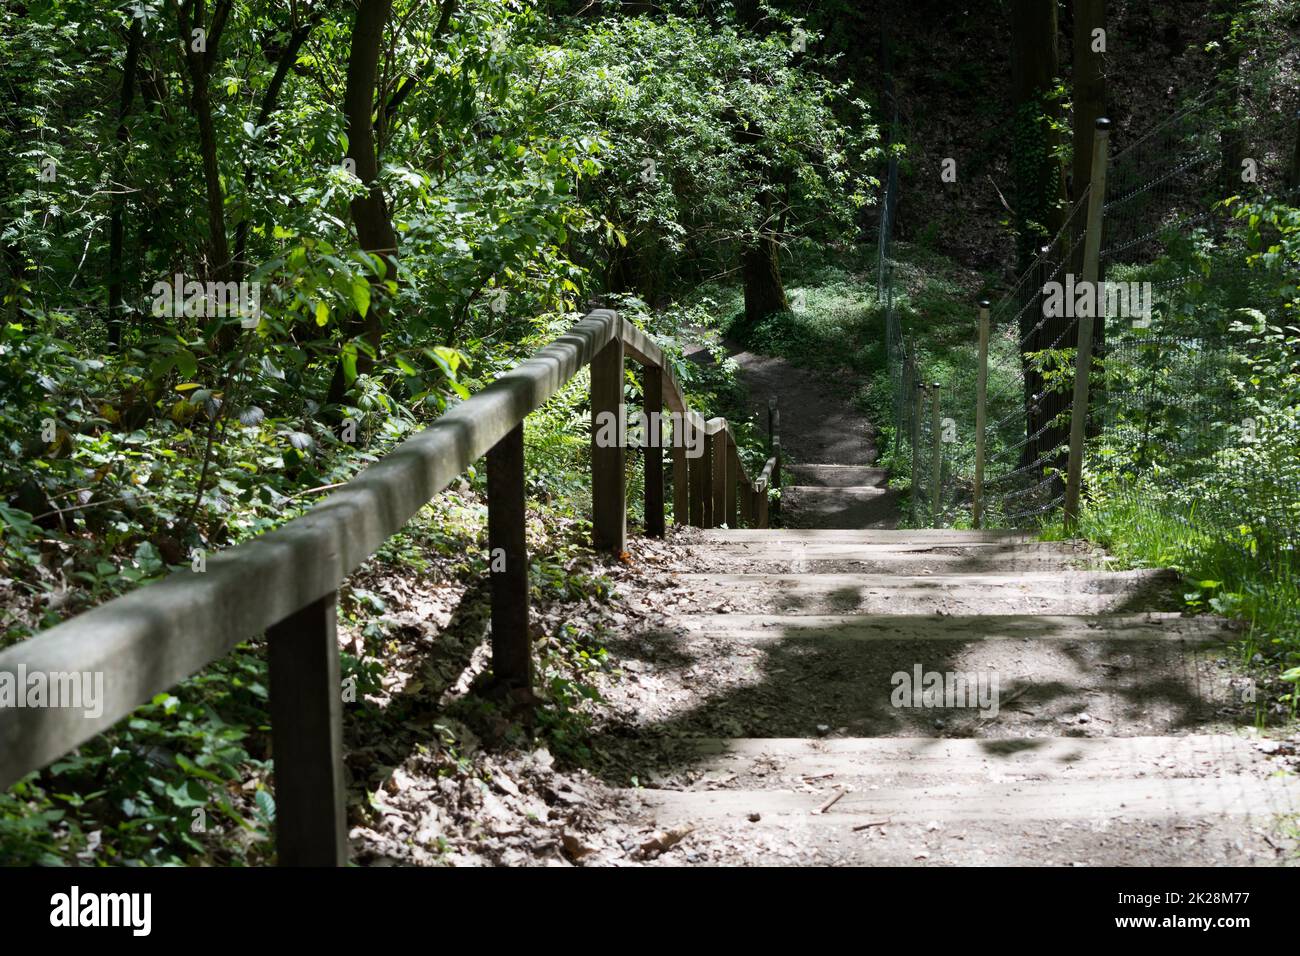 On the community narrow path of narrow stepping stones with handrail in the middle of a forest with tall trees at sunset or sunrise. Stock Photo